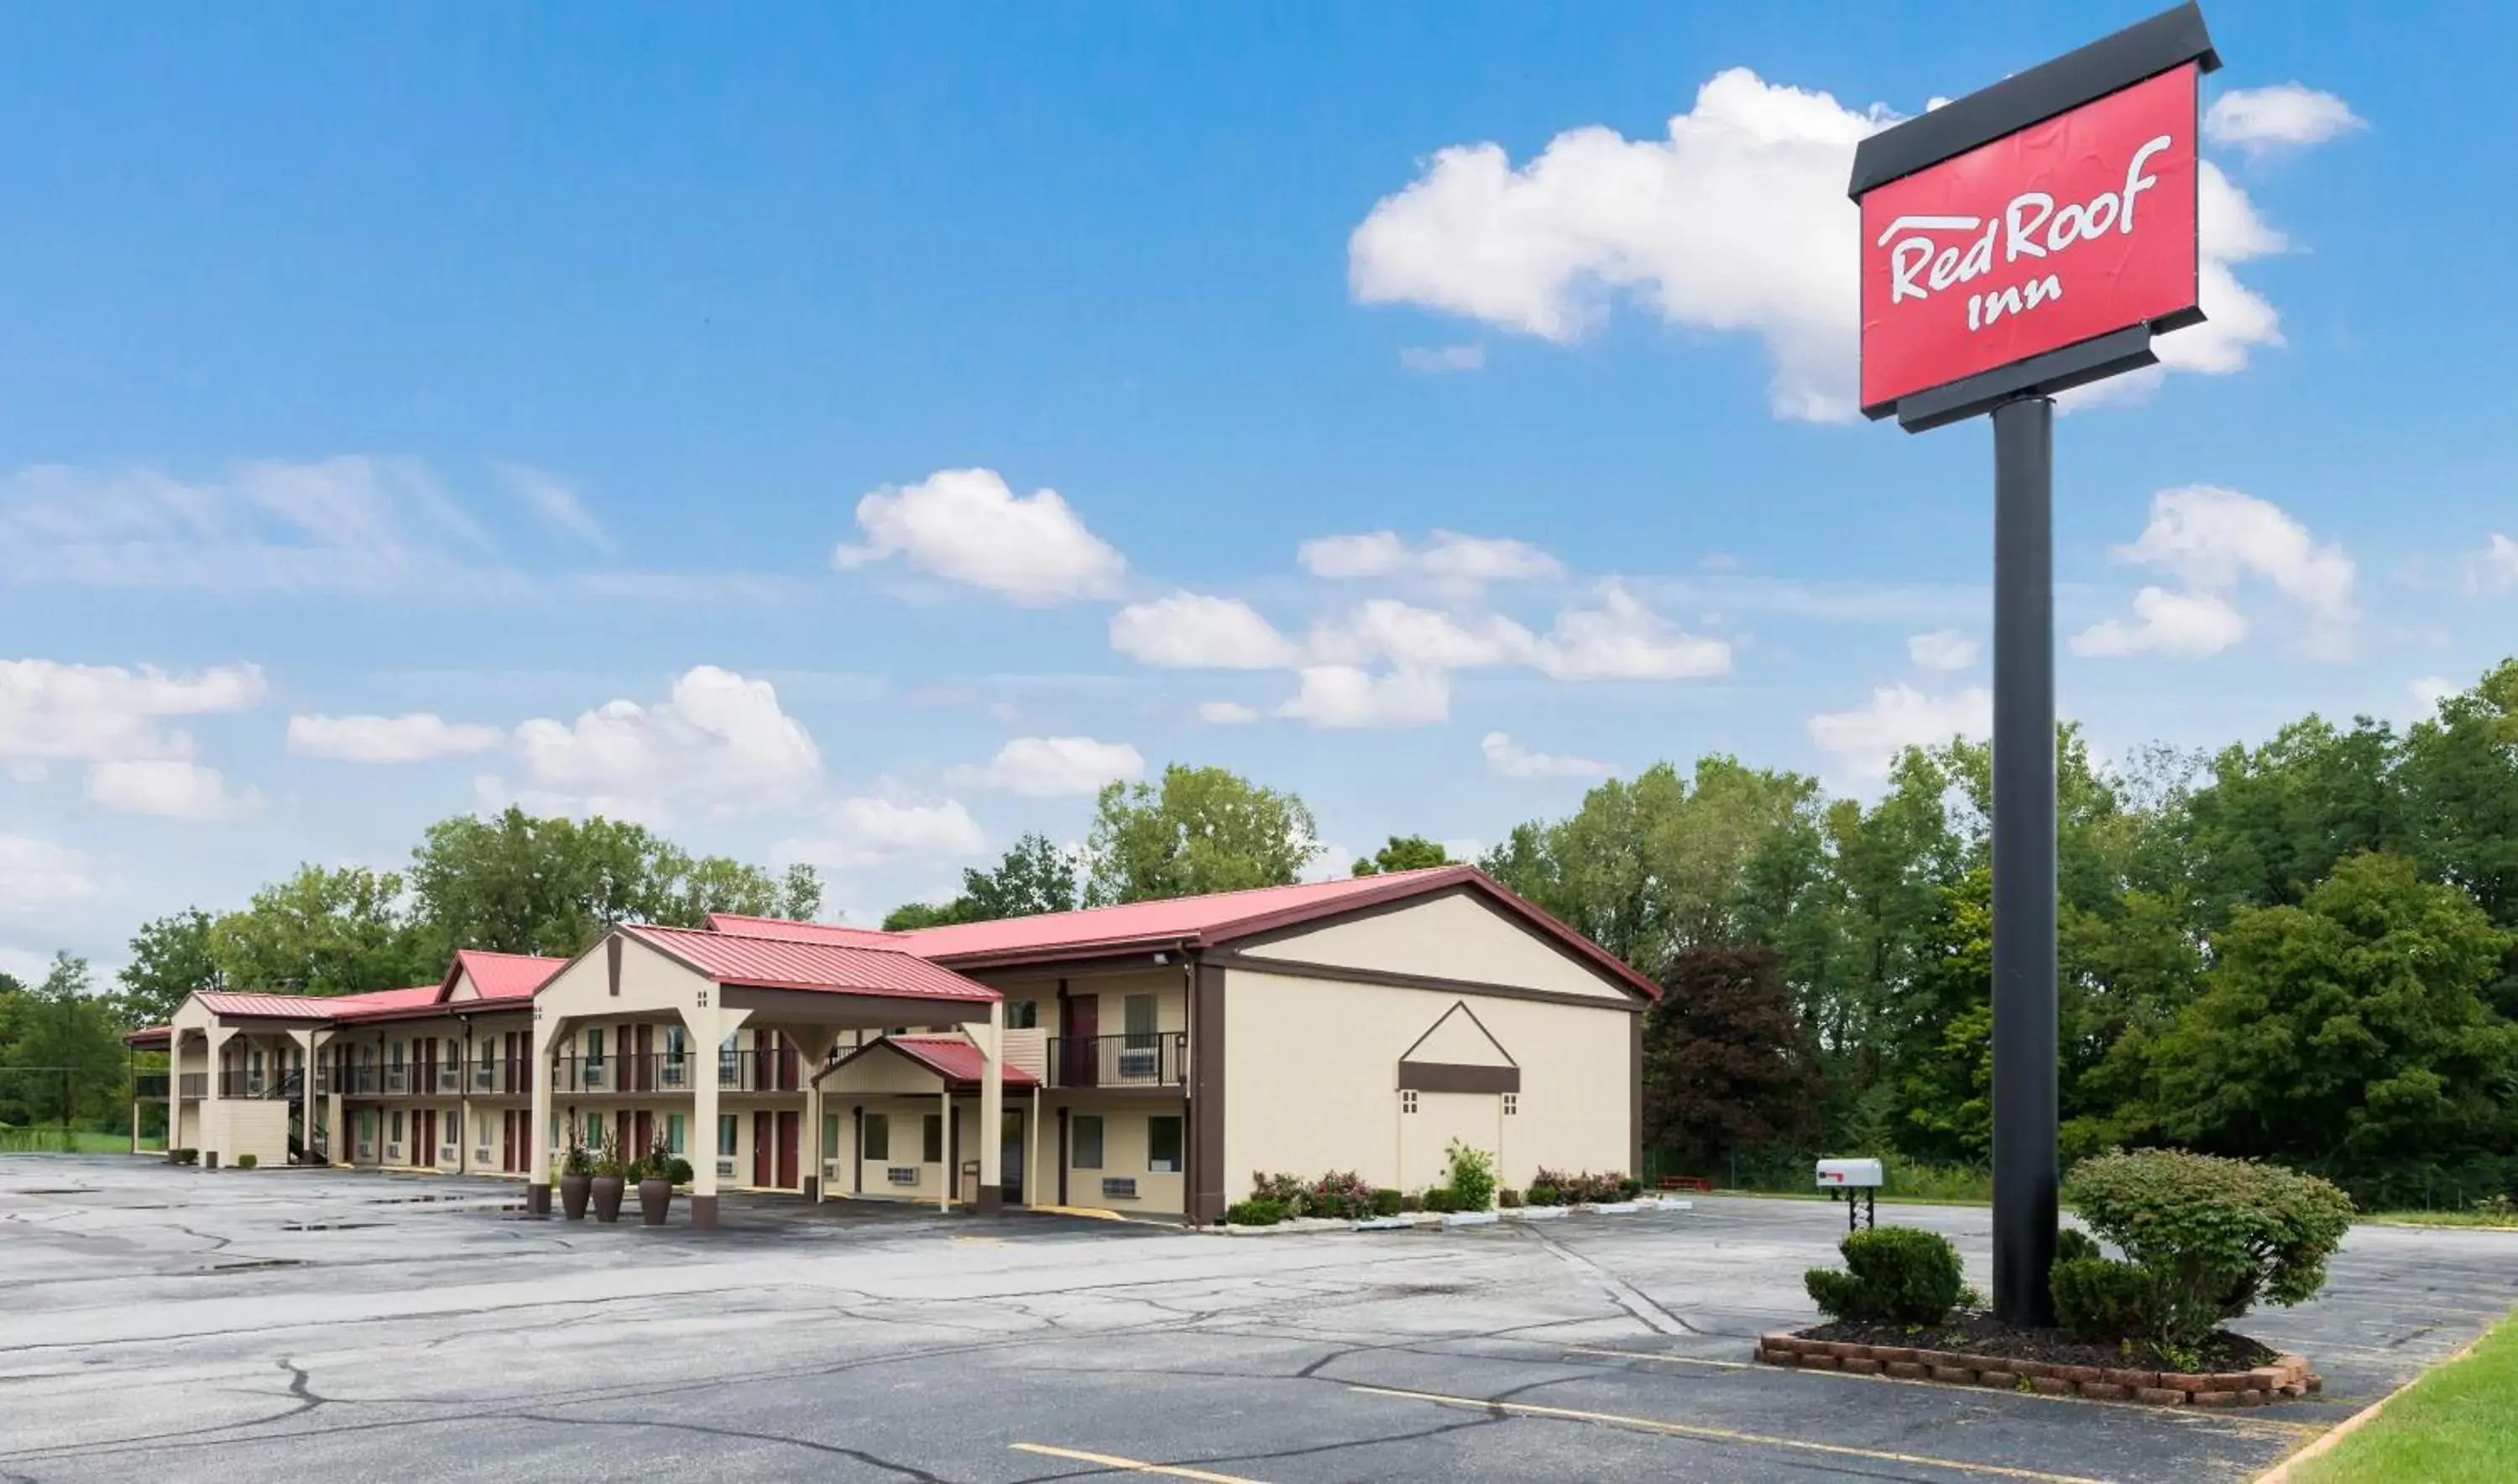 Property Building in Red Roof Inn Marion, IN